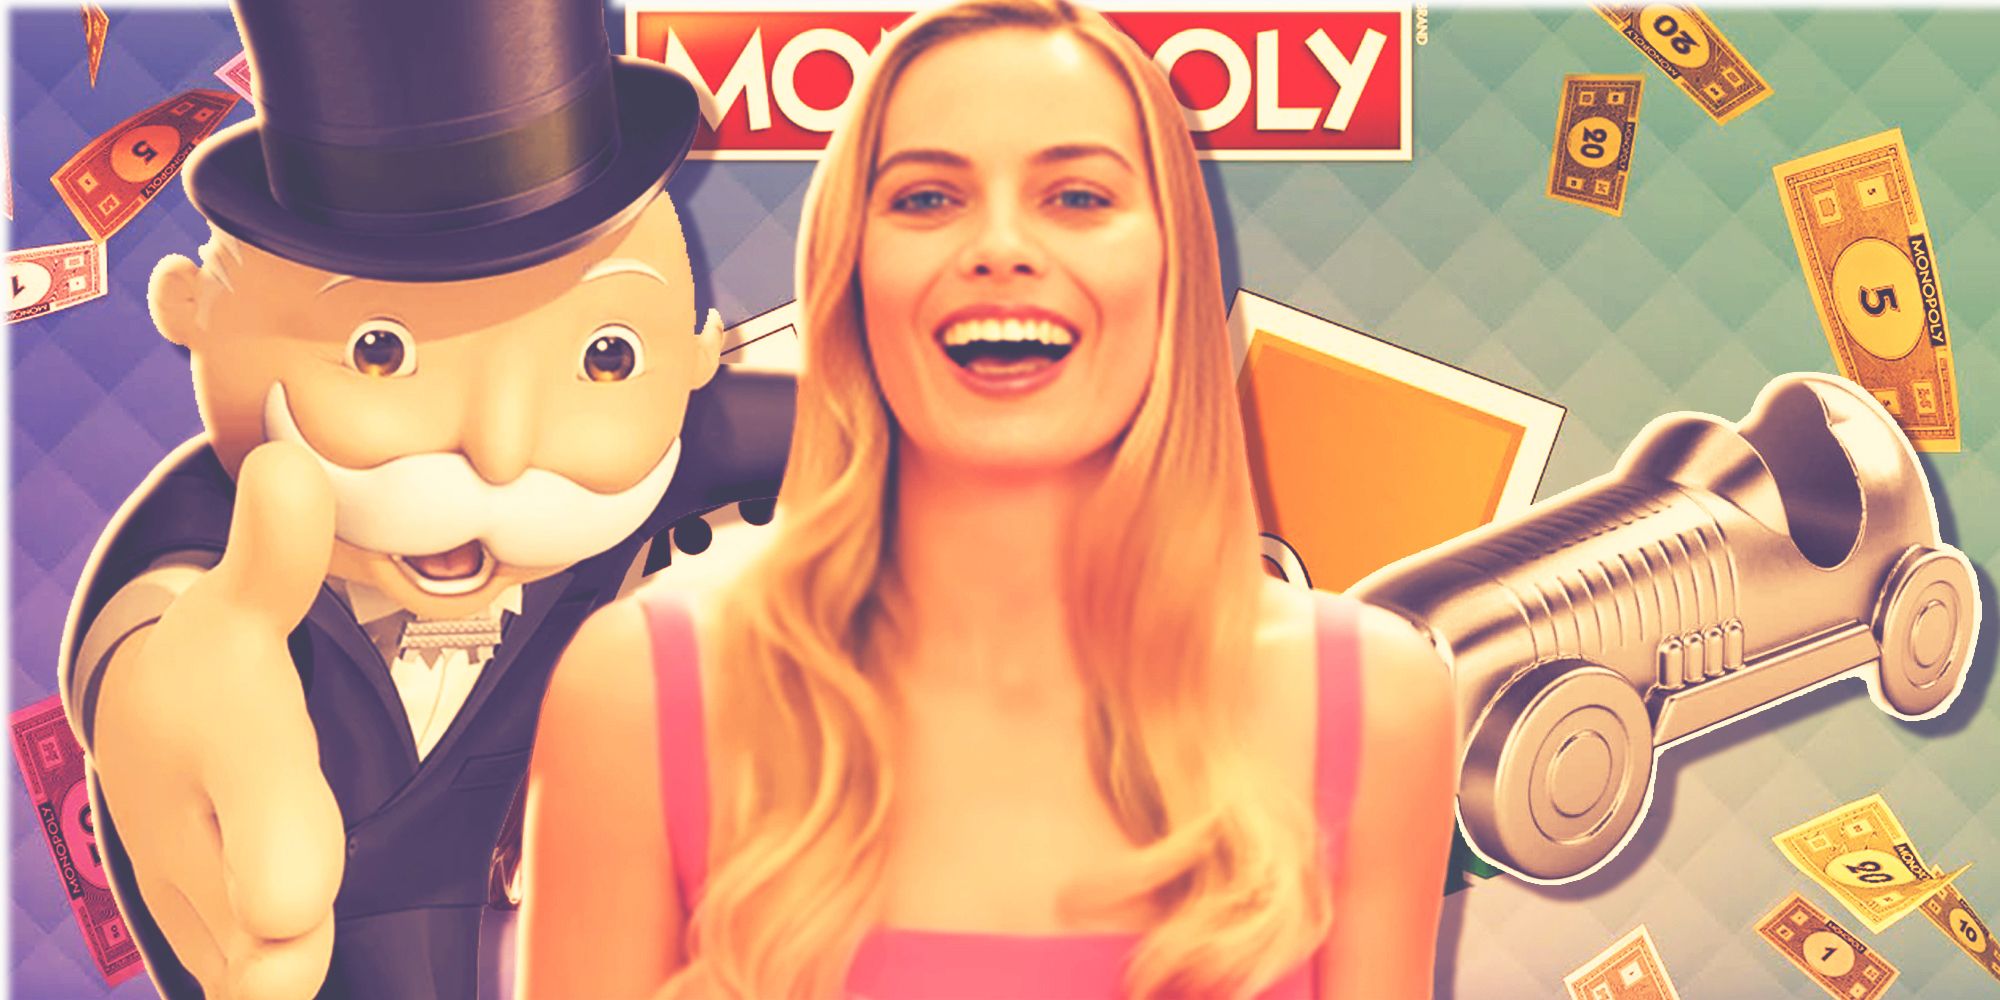 Margot Robbie smiling with the Monopoly guy, the Monopoly logo, the Monopoly car piece, and Monopoly money in the background